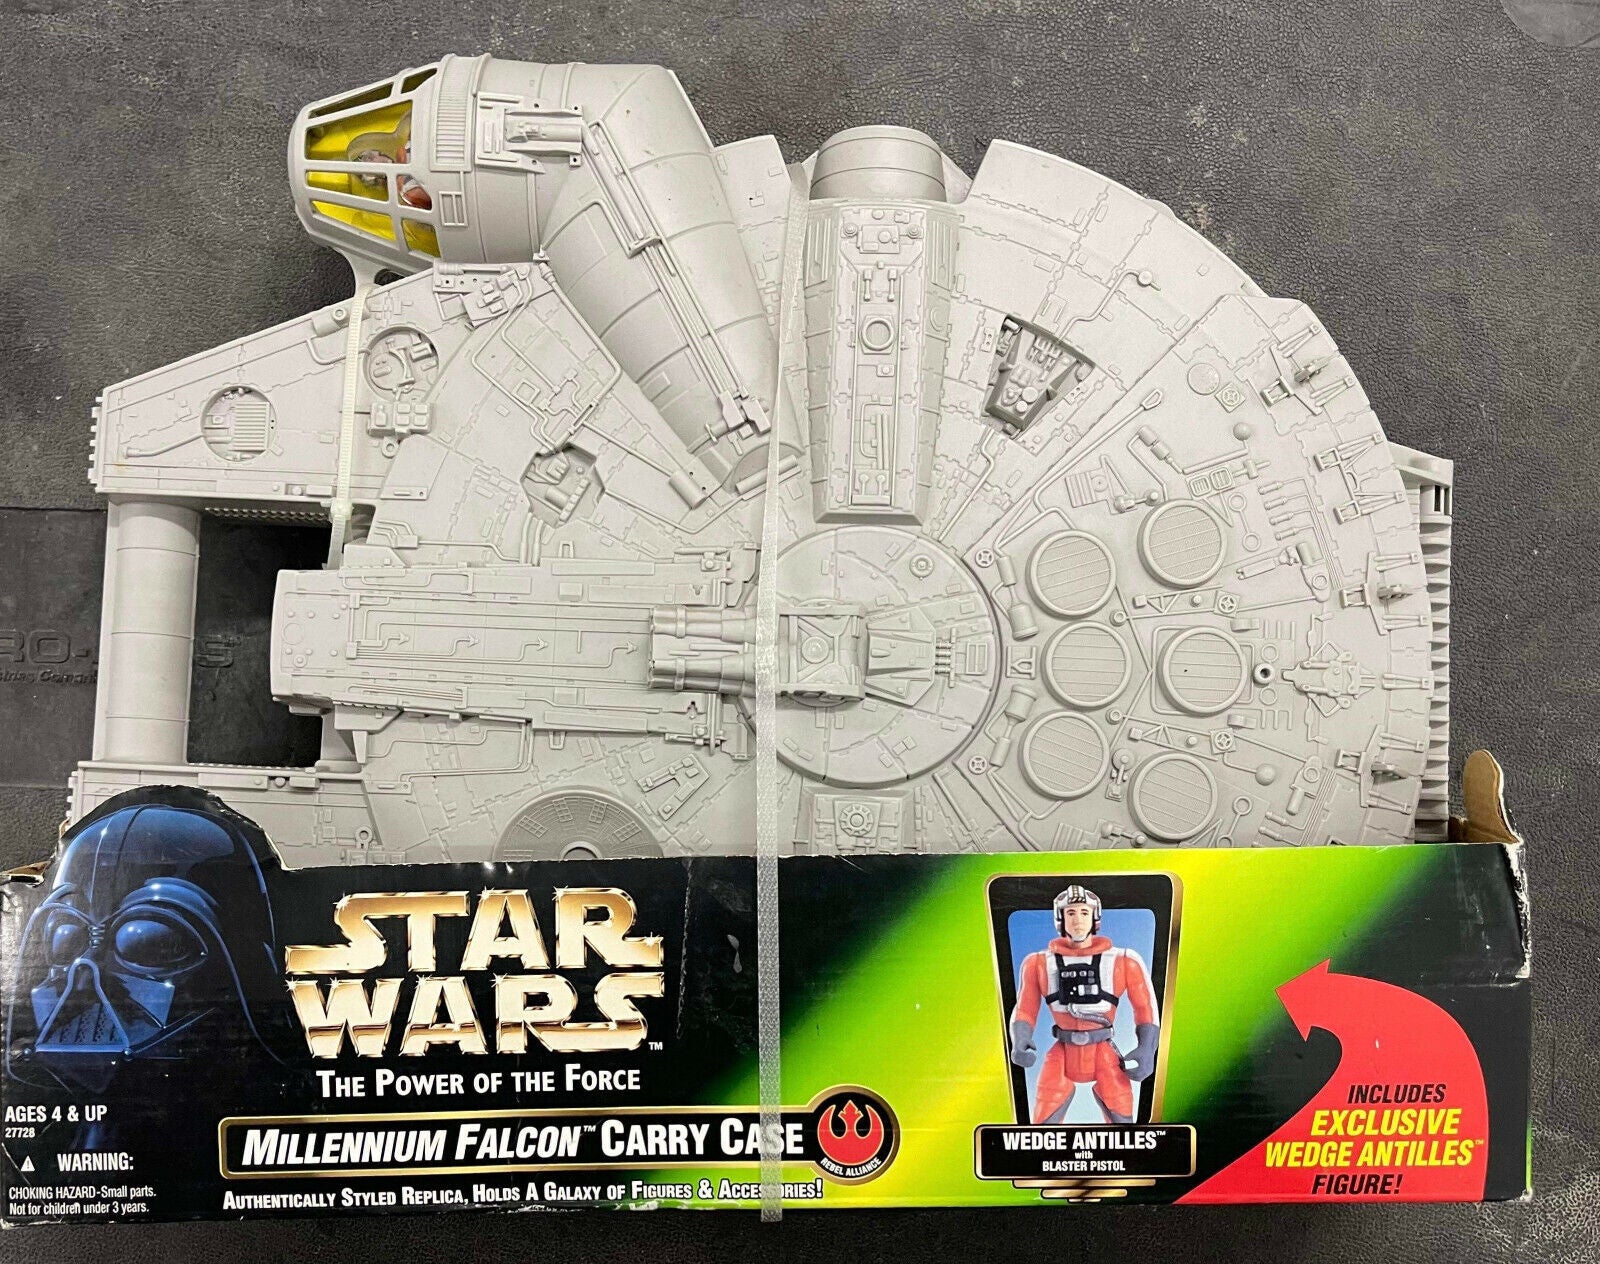 Star Wars Millenium Falcon Carry Case - with Wedge Antilles Action Figure